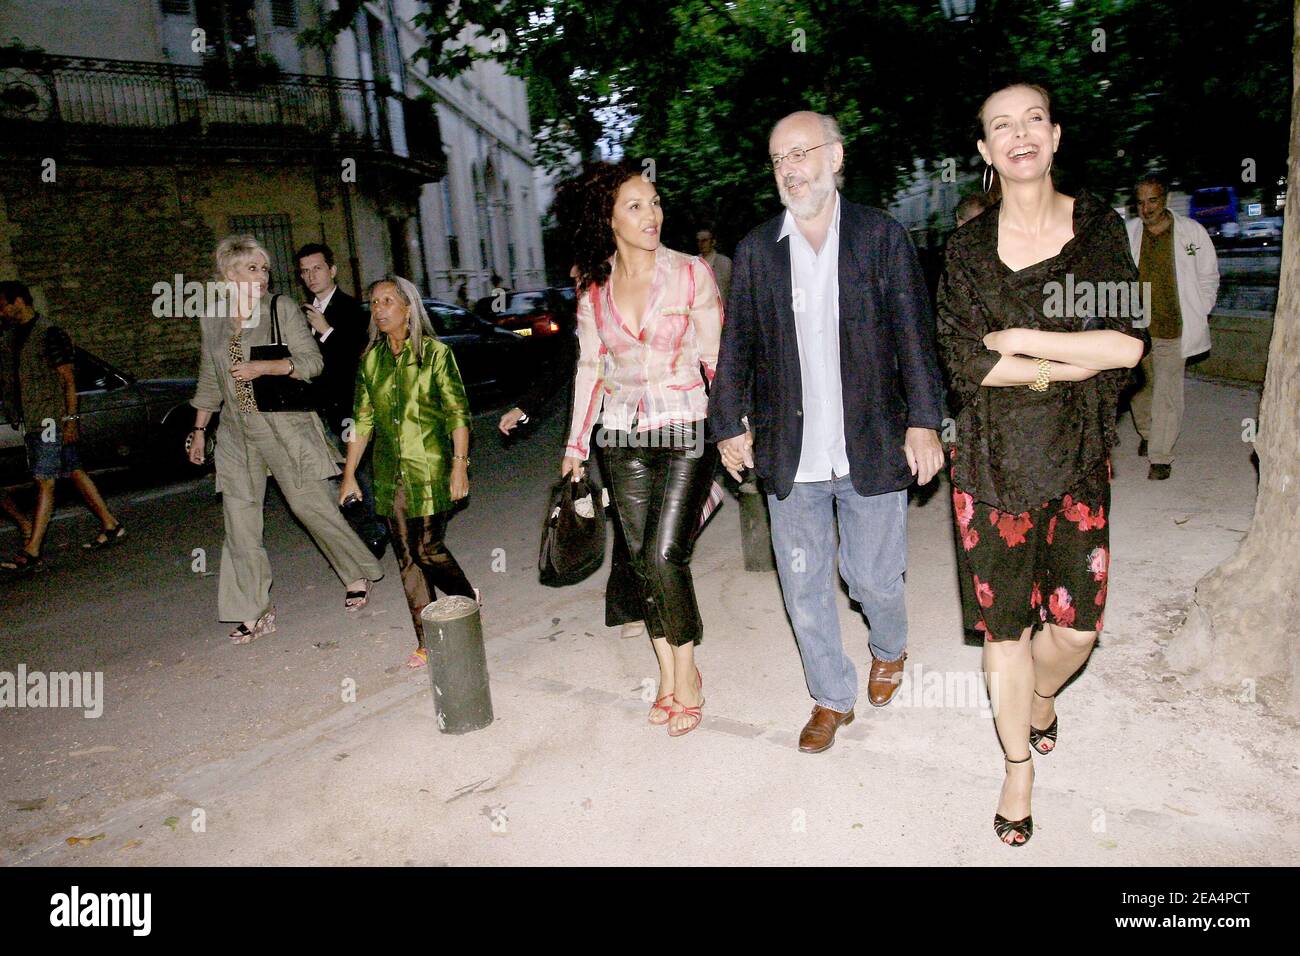 French director Bertrand Blier, his wife (L) and actress Carole Bouquet arrive to the festival 'A Director in the City' held in Nimes, southern France, on August 2, 2005, as part of a special tribute to Bertrand Blier and his father, the late actor Bernard Blier. Photo by Gerald Holubowicz/ABACAPRESS.COM. Stock Photo